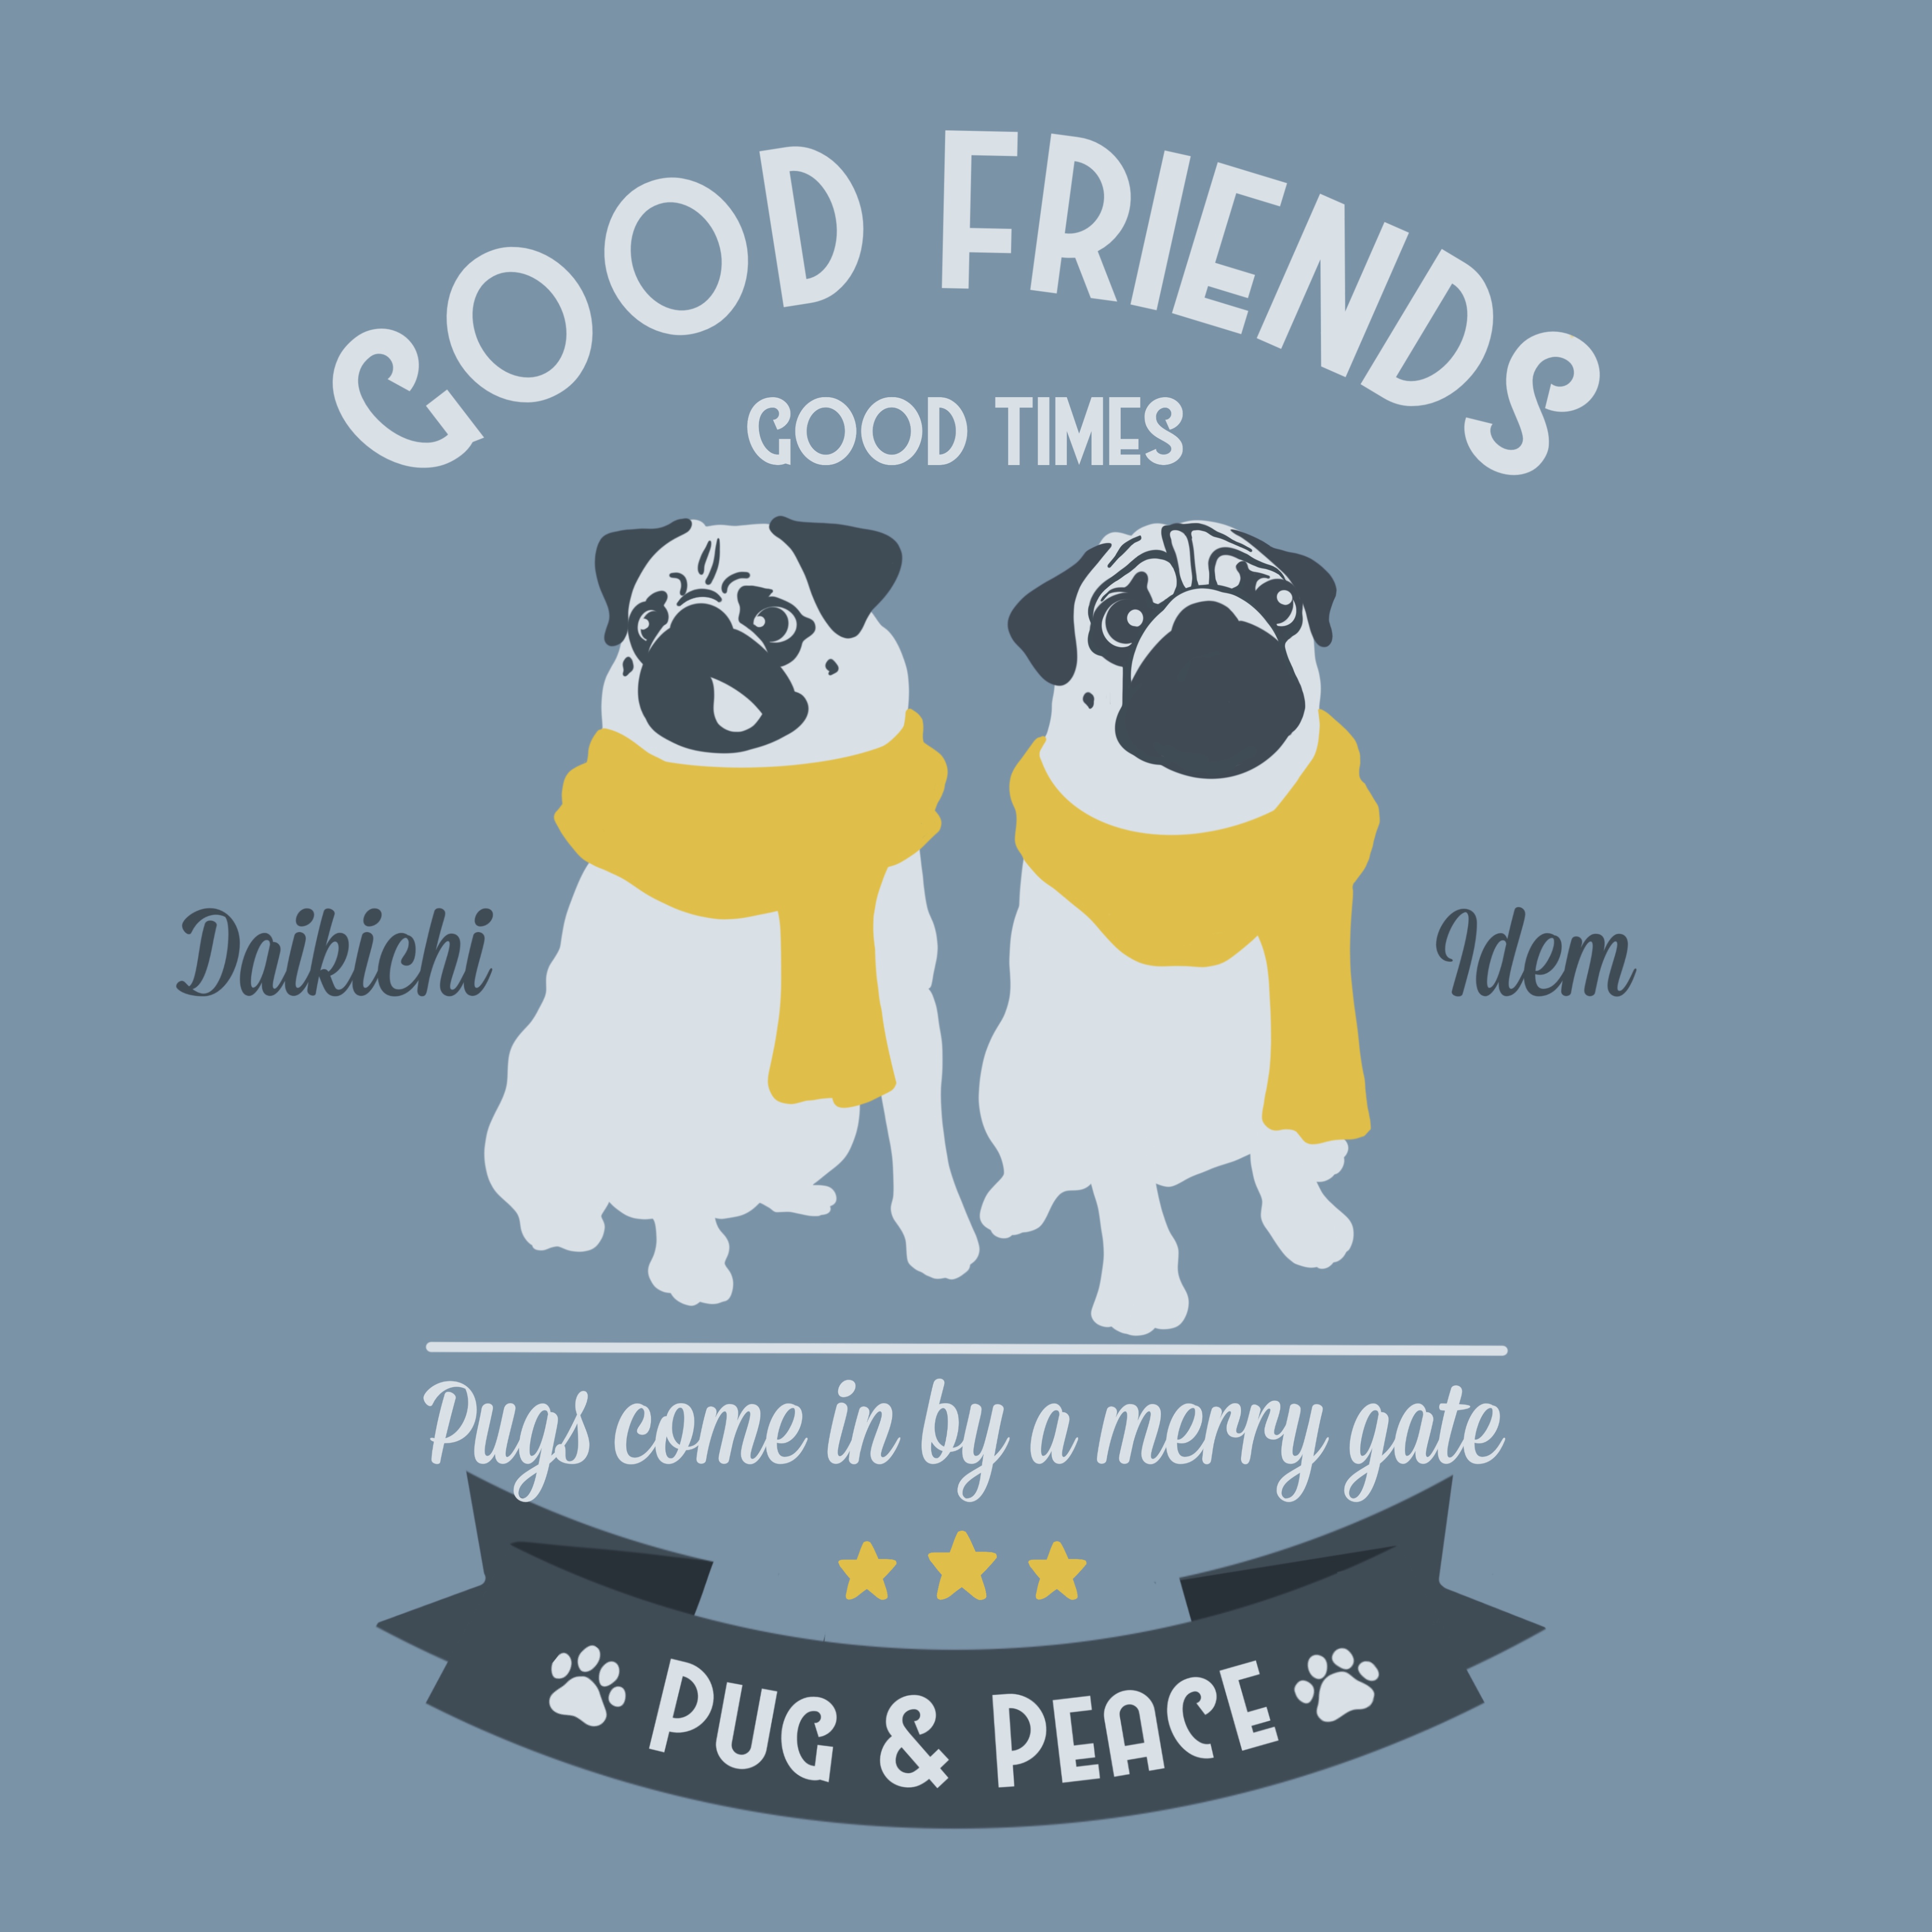 Good Feiends Good Timesイラスト＆シール